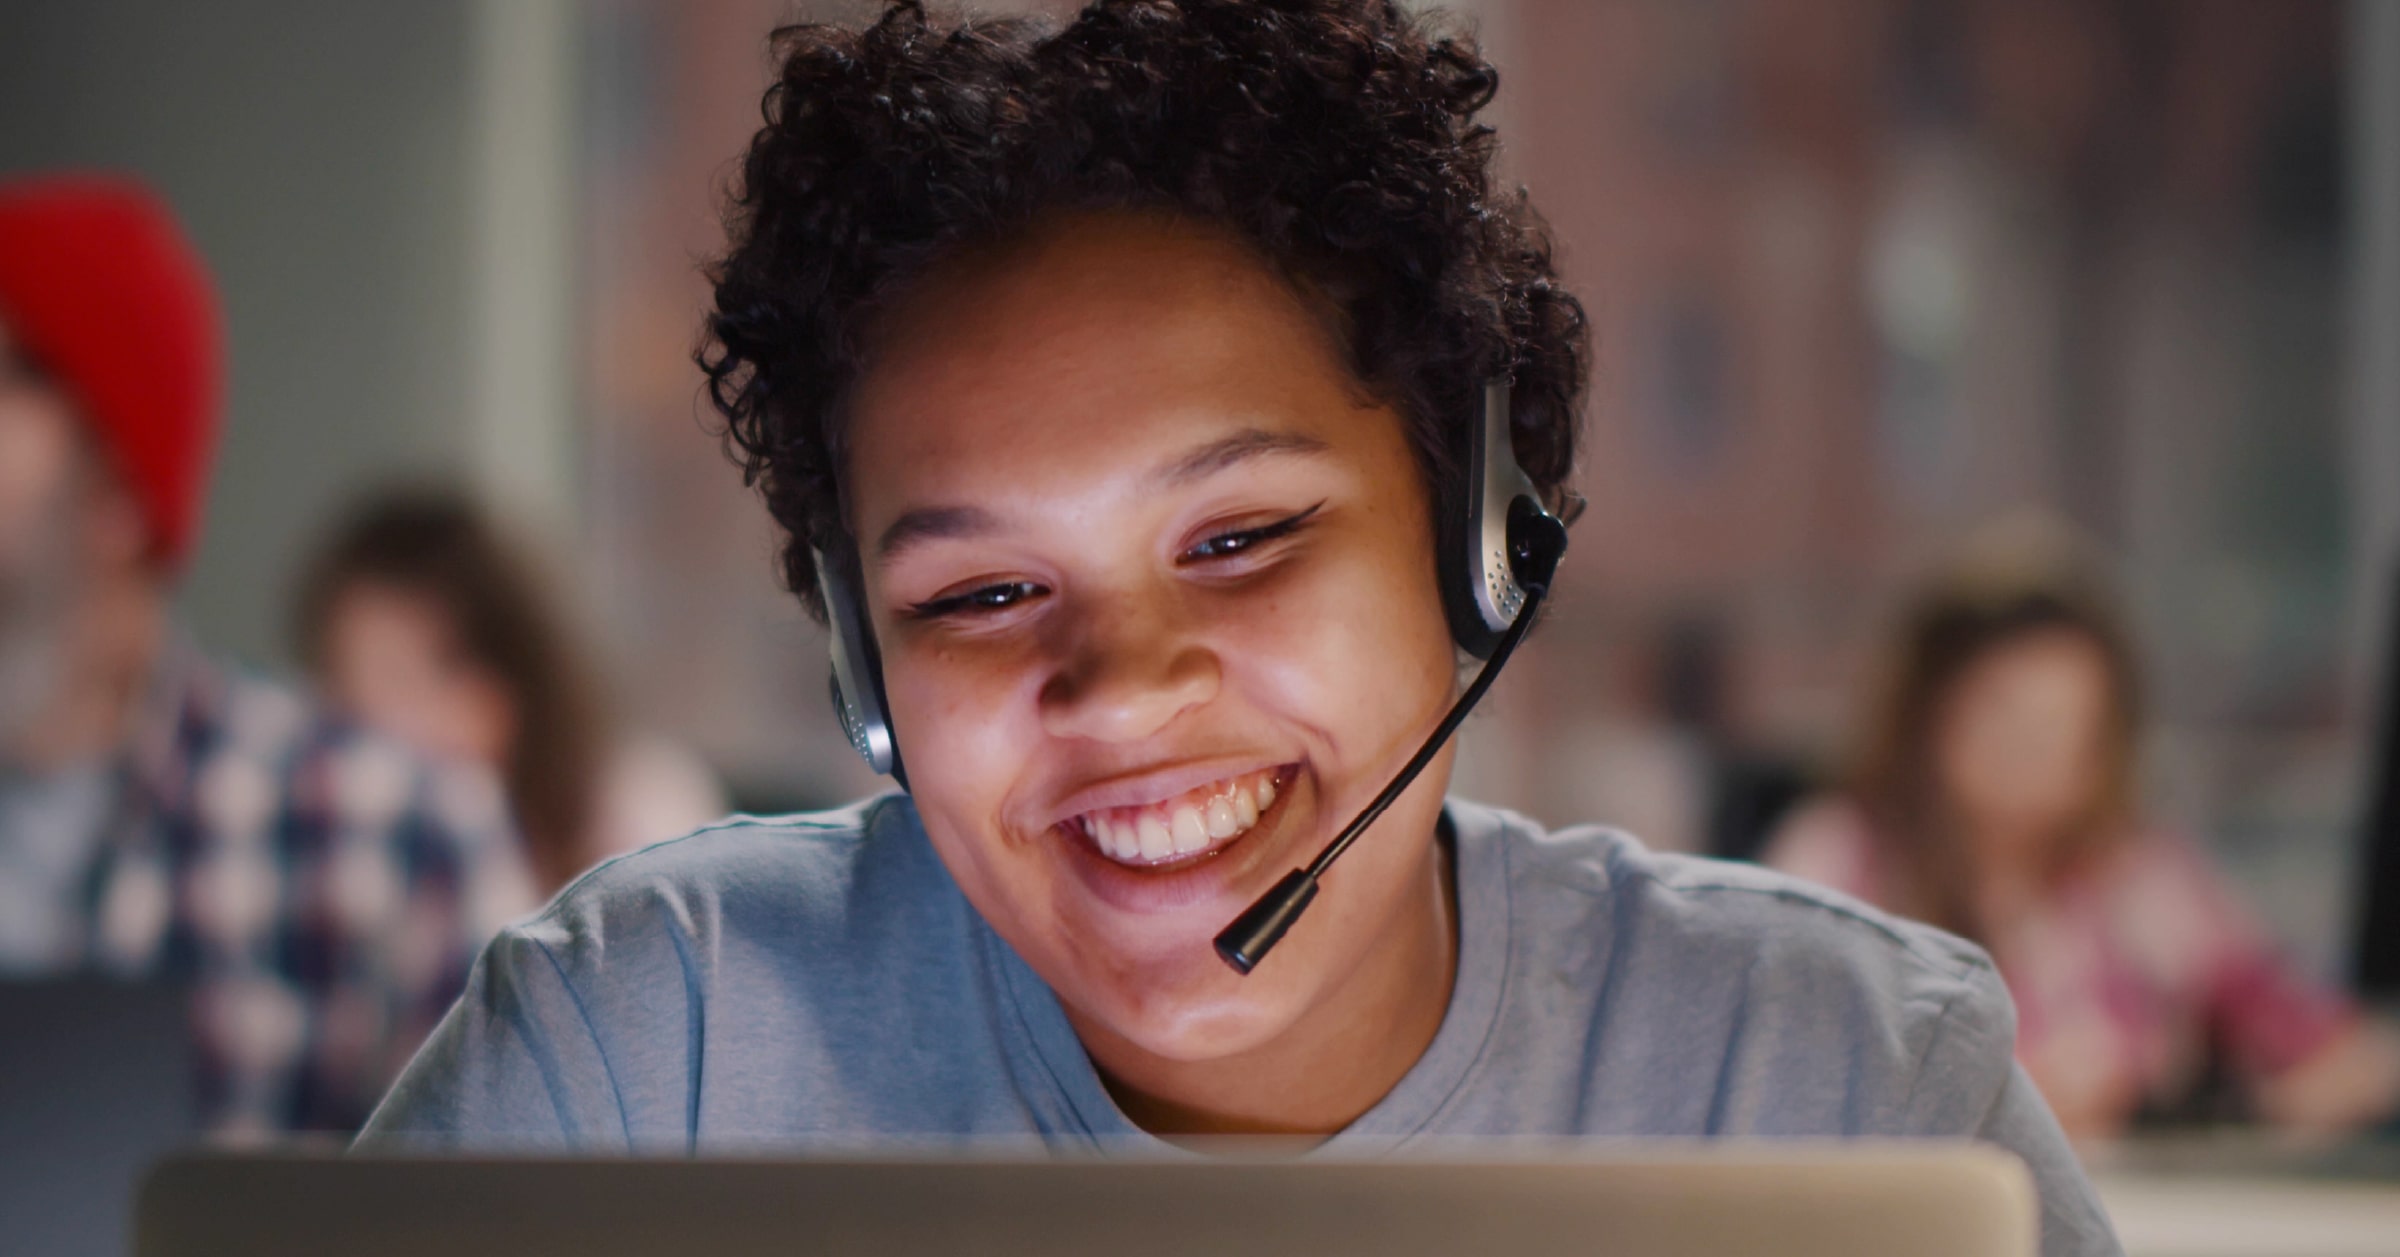 Lifesize Announces Sweeping Enhancements to Suite of Cloud Contact Center and Meeting Solutions